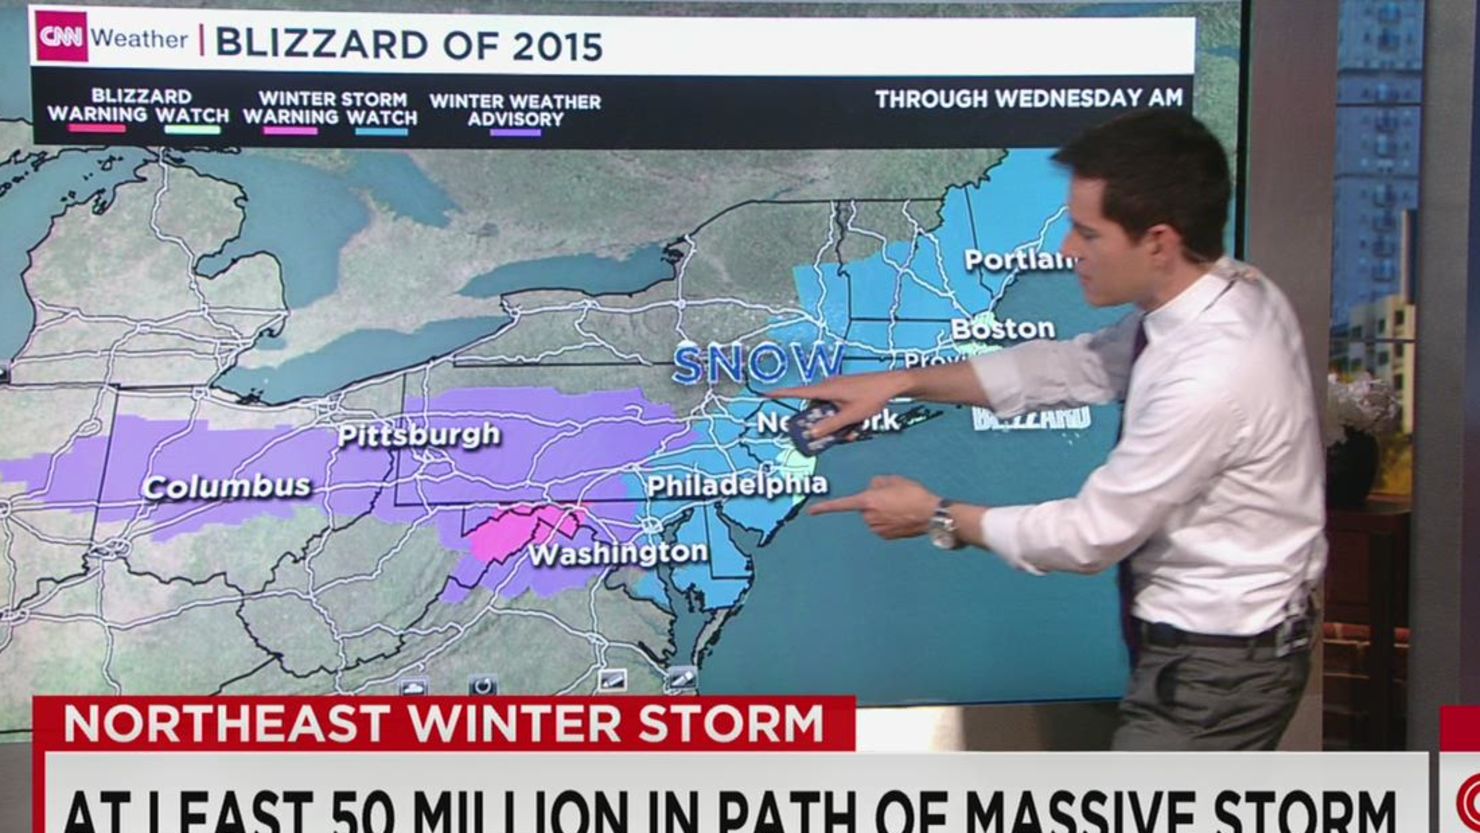 The Blizzard of 2015 could hit 50 million in the Northeast